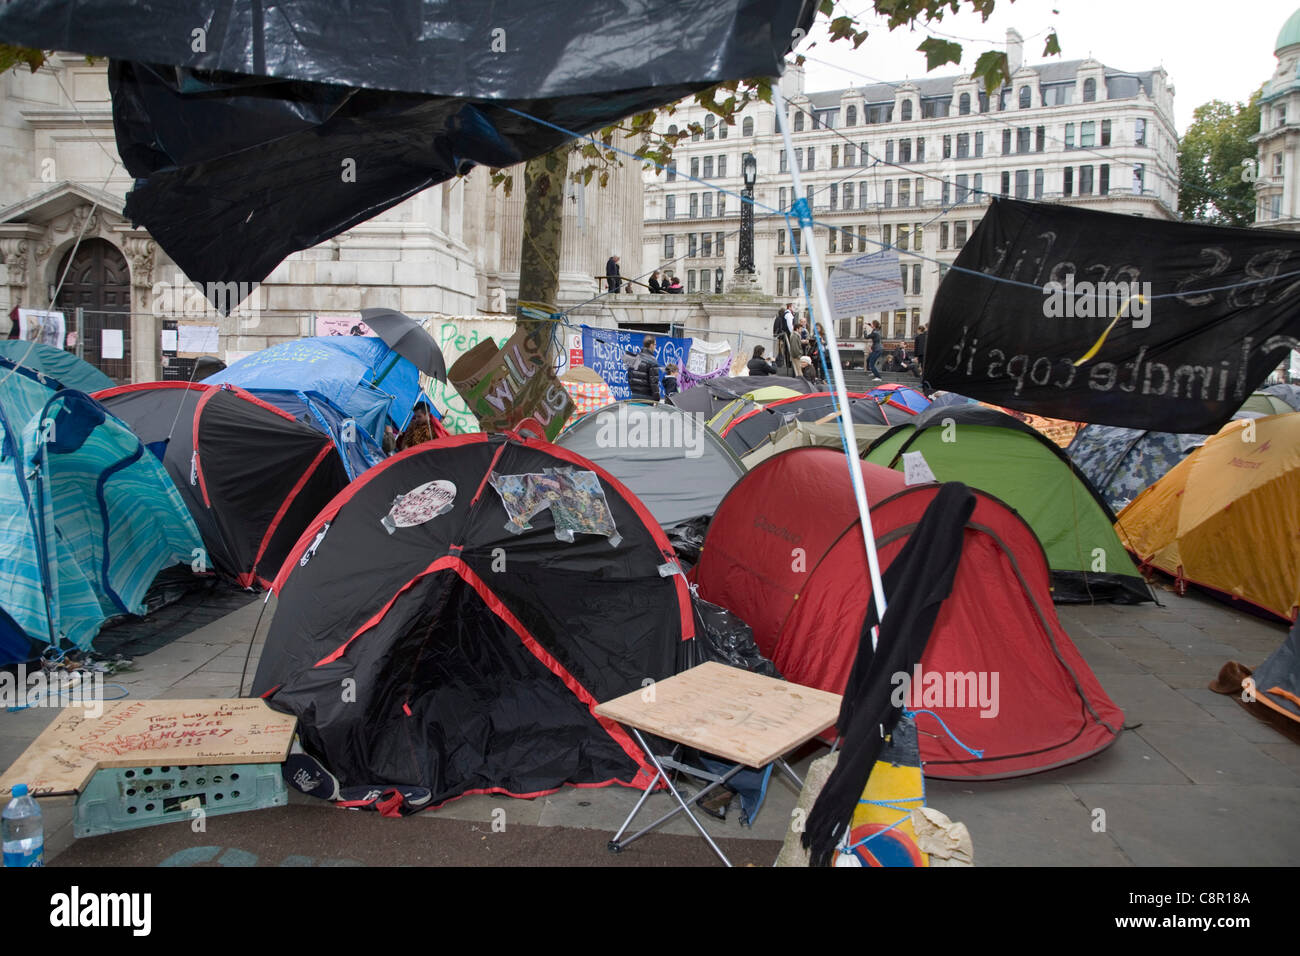 Protesters tent encampment occupying the area surrounding St.Paul's Cathedral as part of ant-capitalist protest Stock Photo